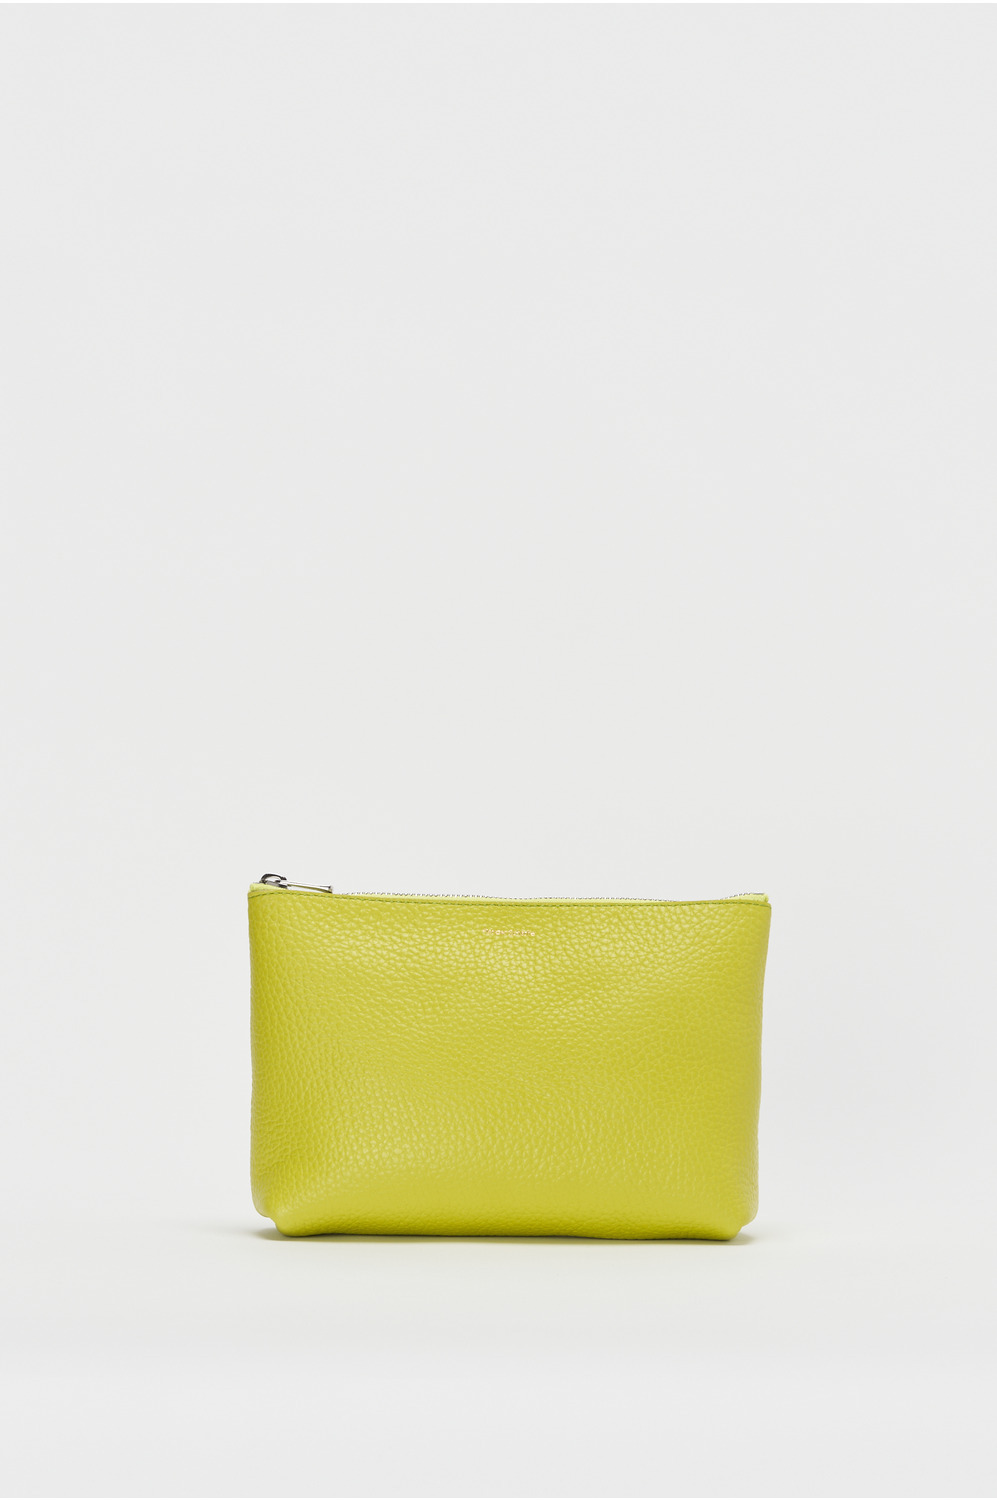 pouch M 詳細画像 lime green 1